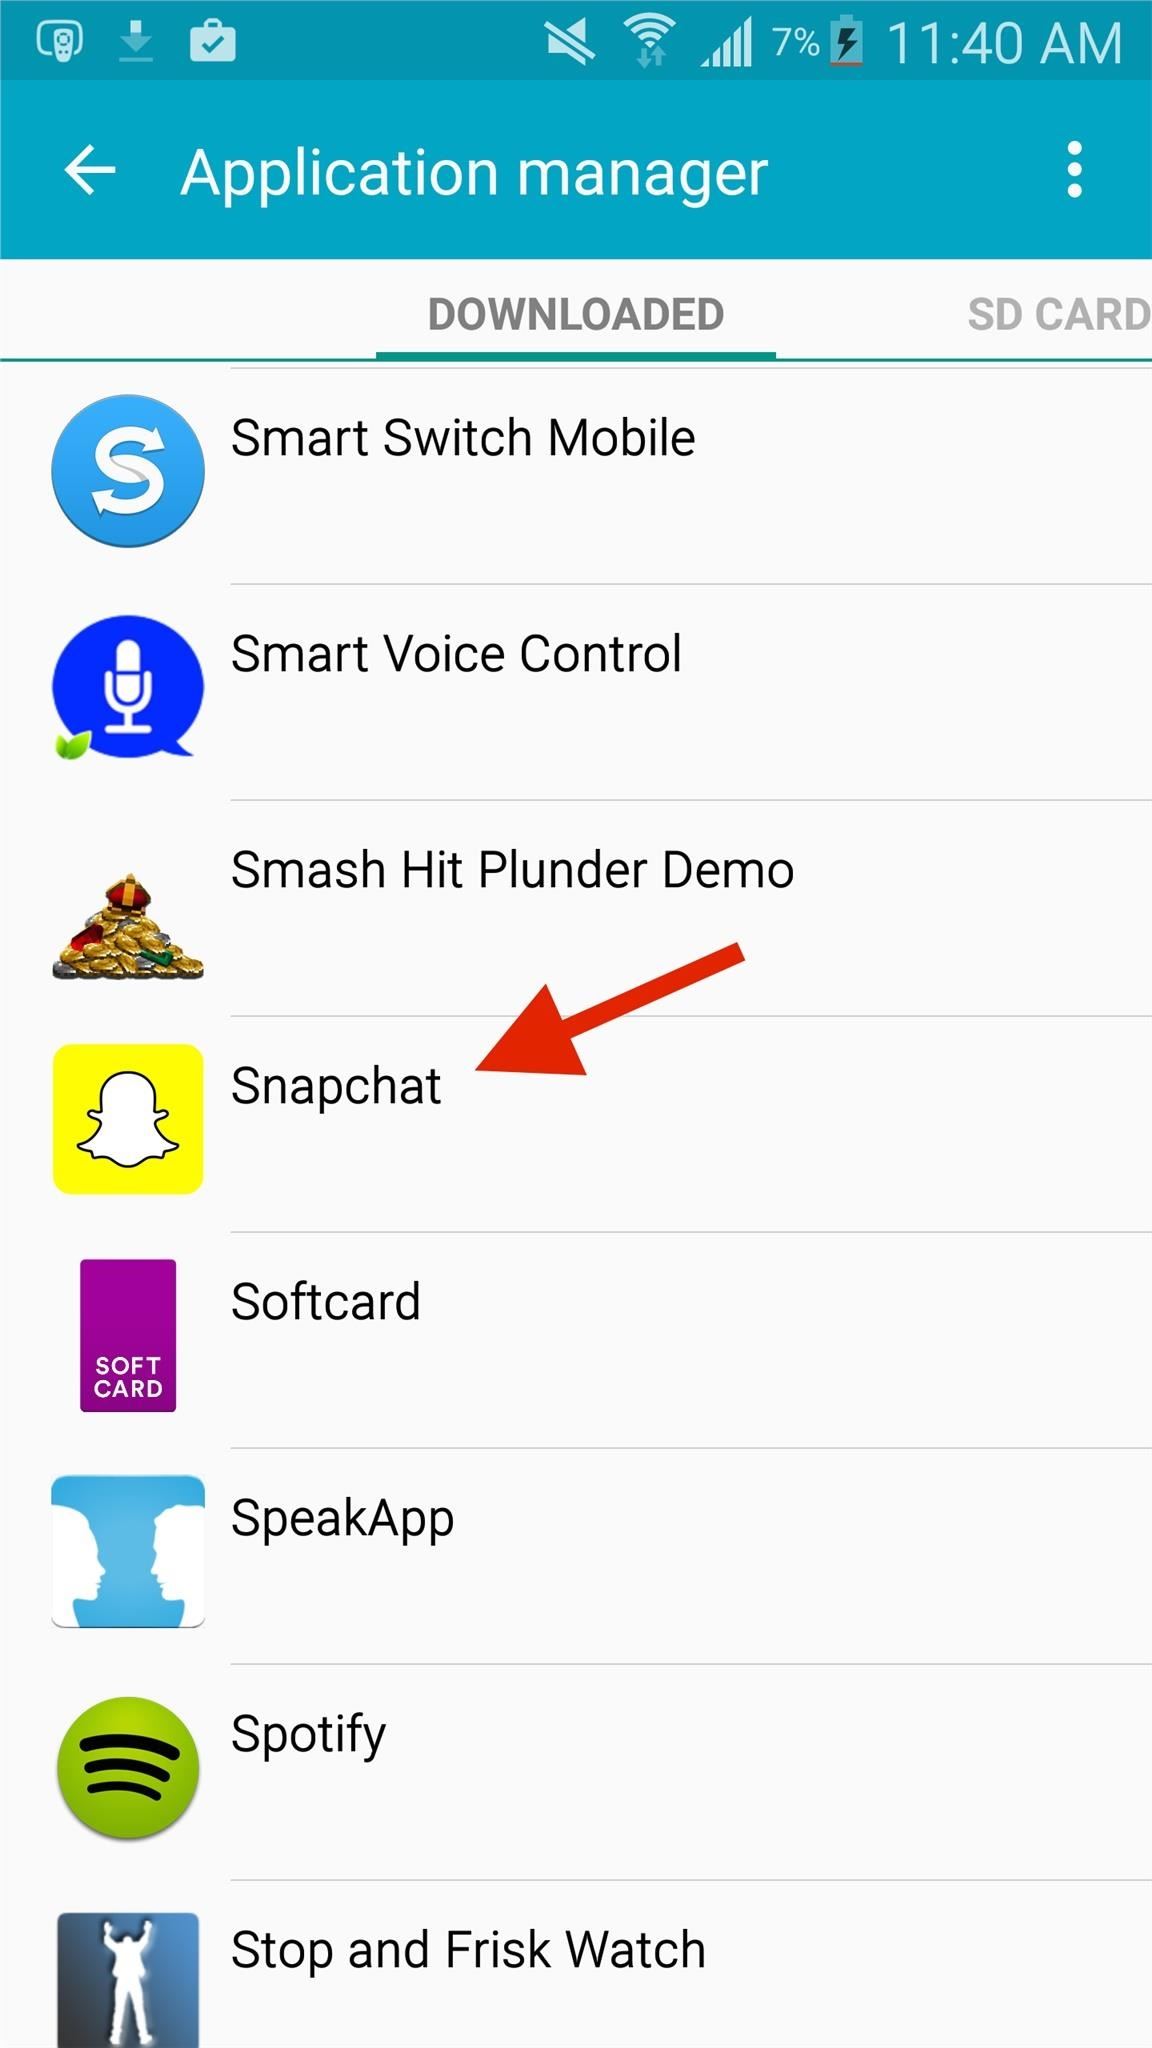 How to Get Rid of Annoying Discover Stories in Your Snapchat Feed